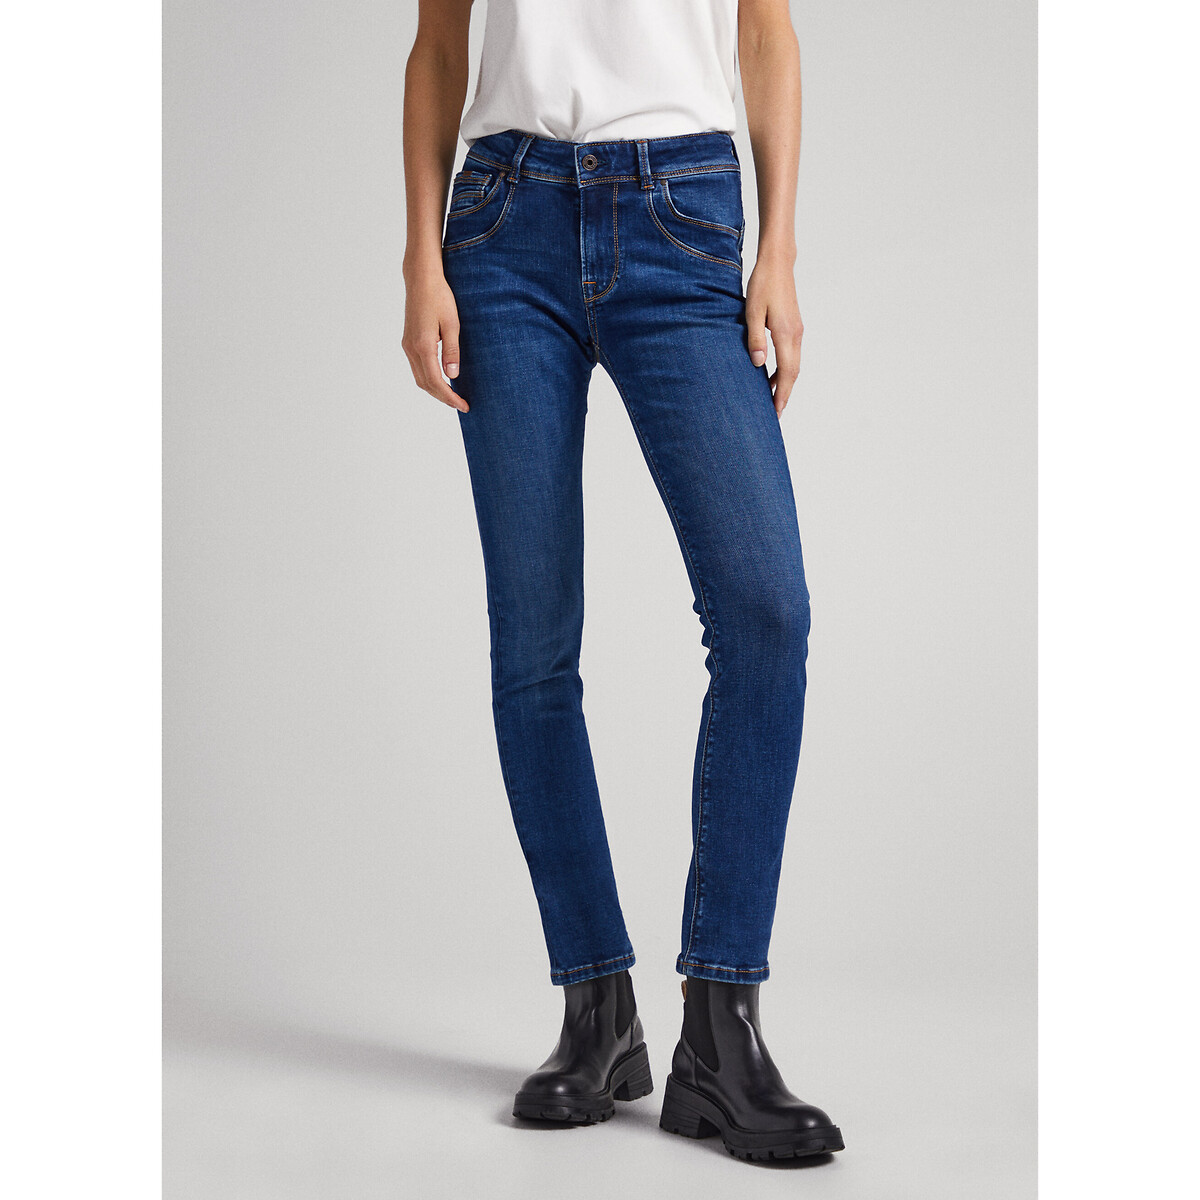 Image of Brookes Slim Fit Jeans in Mid Rise